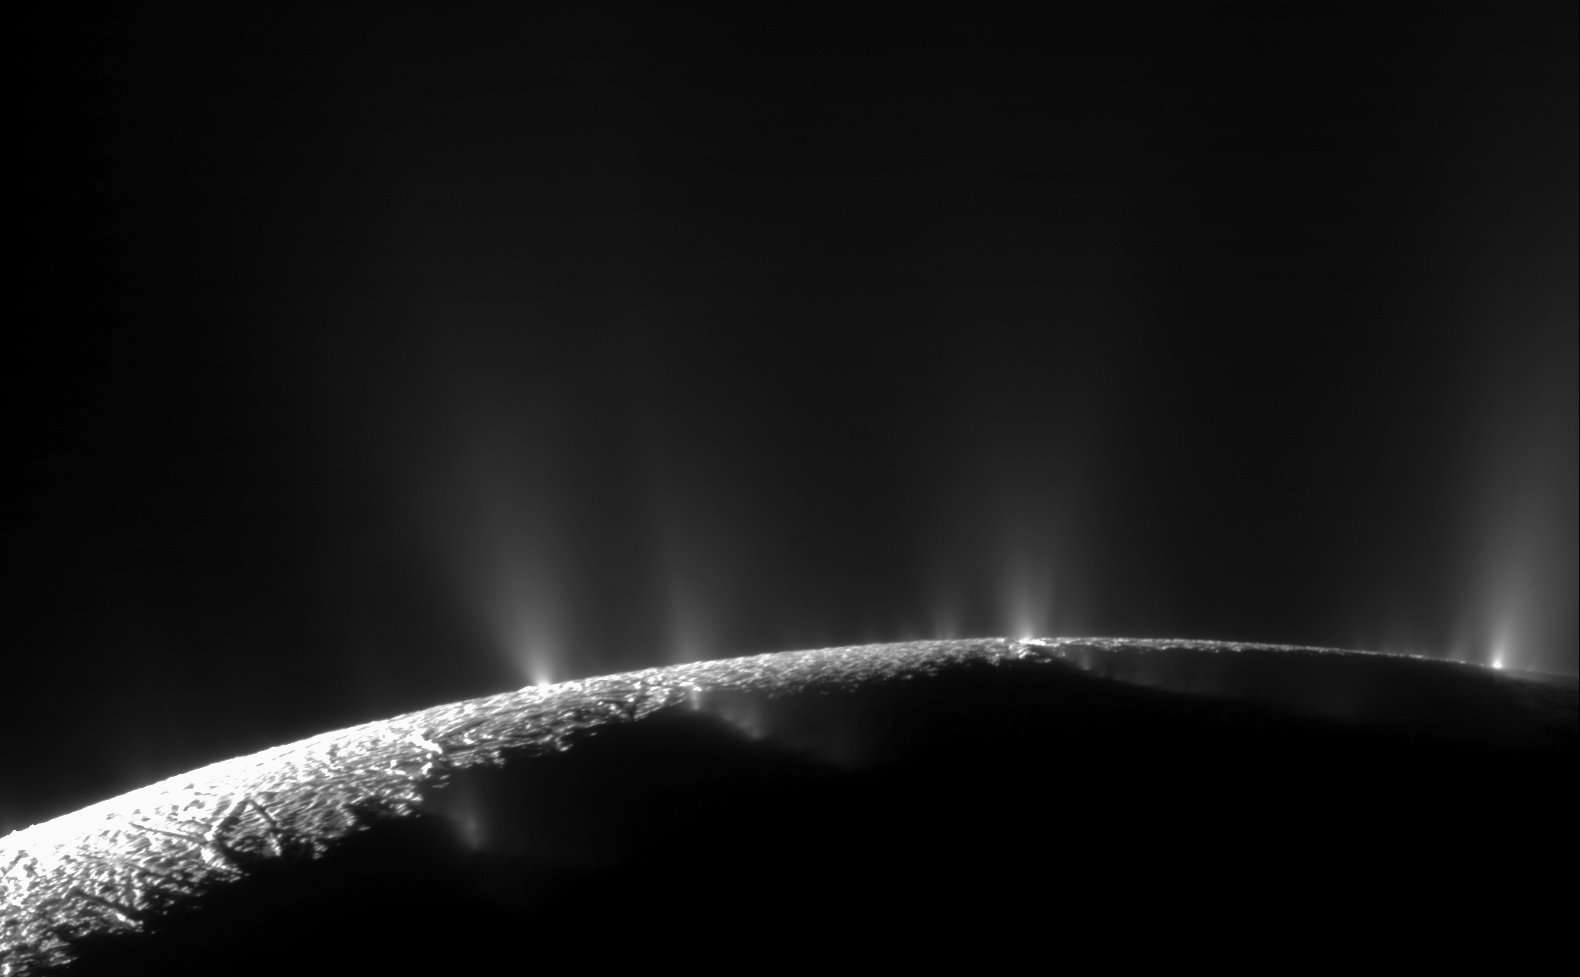 Geysers erupting on the surface of Enceladus, photographed by Cassini